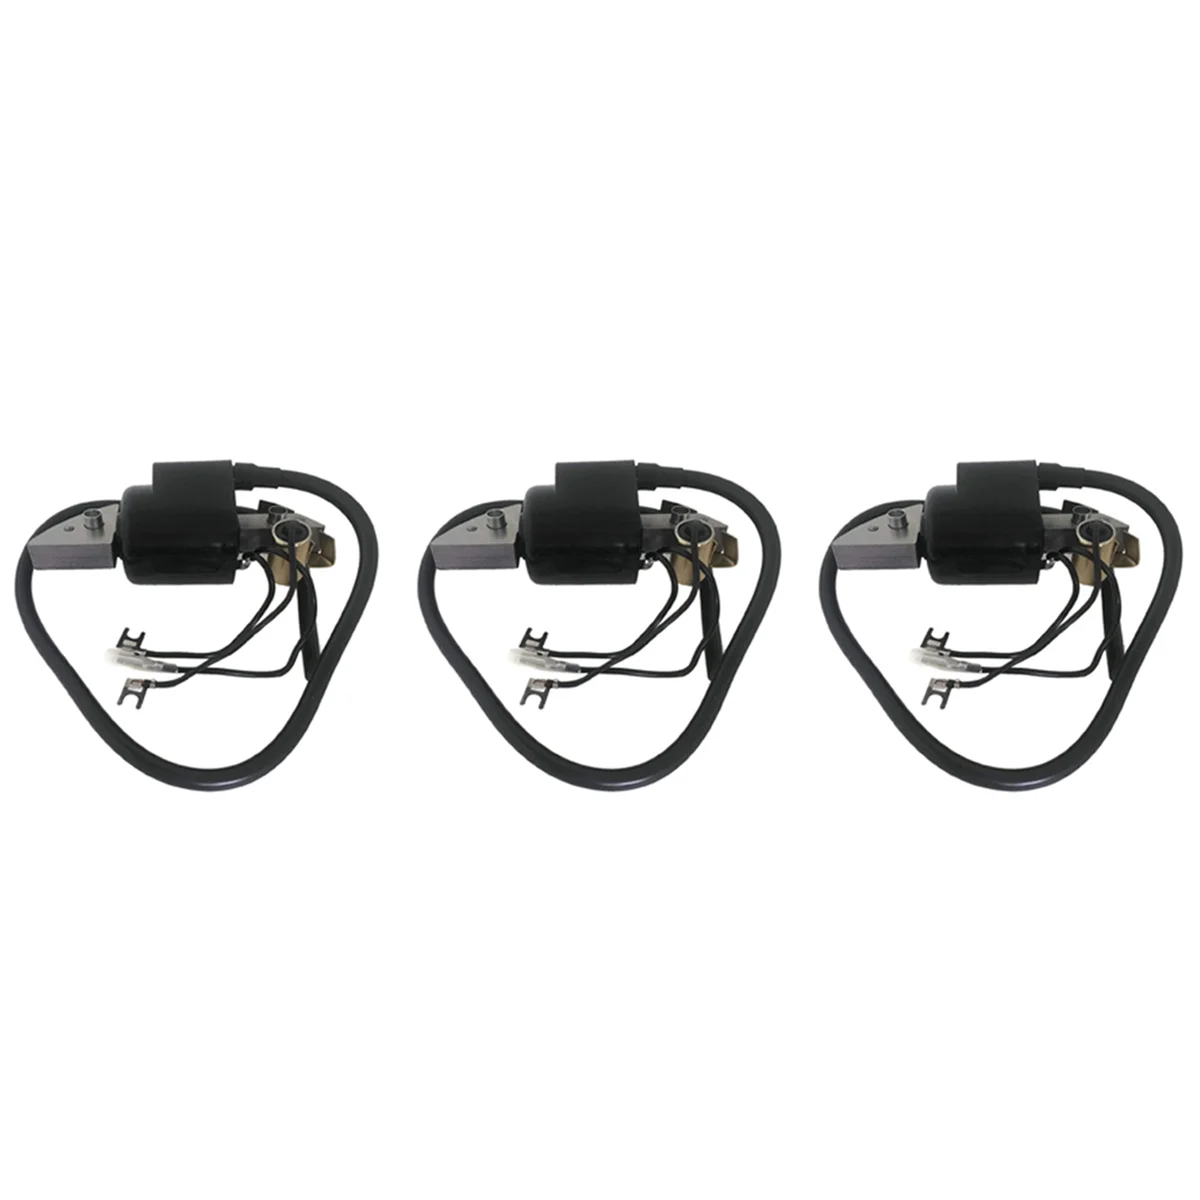 

3X Motorcycle Ignition Coil Fits for Honda G150 G200 G300 G400 30500-887-303 30560-883-015